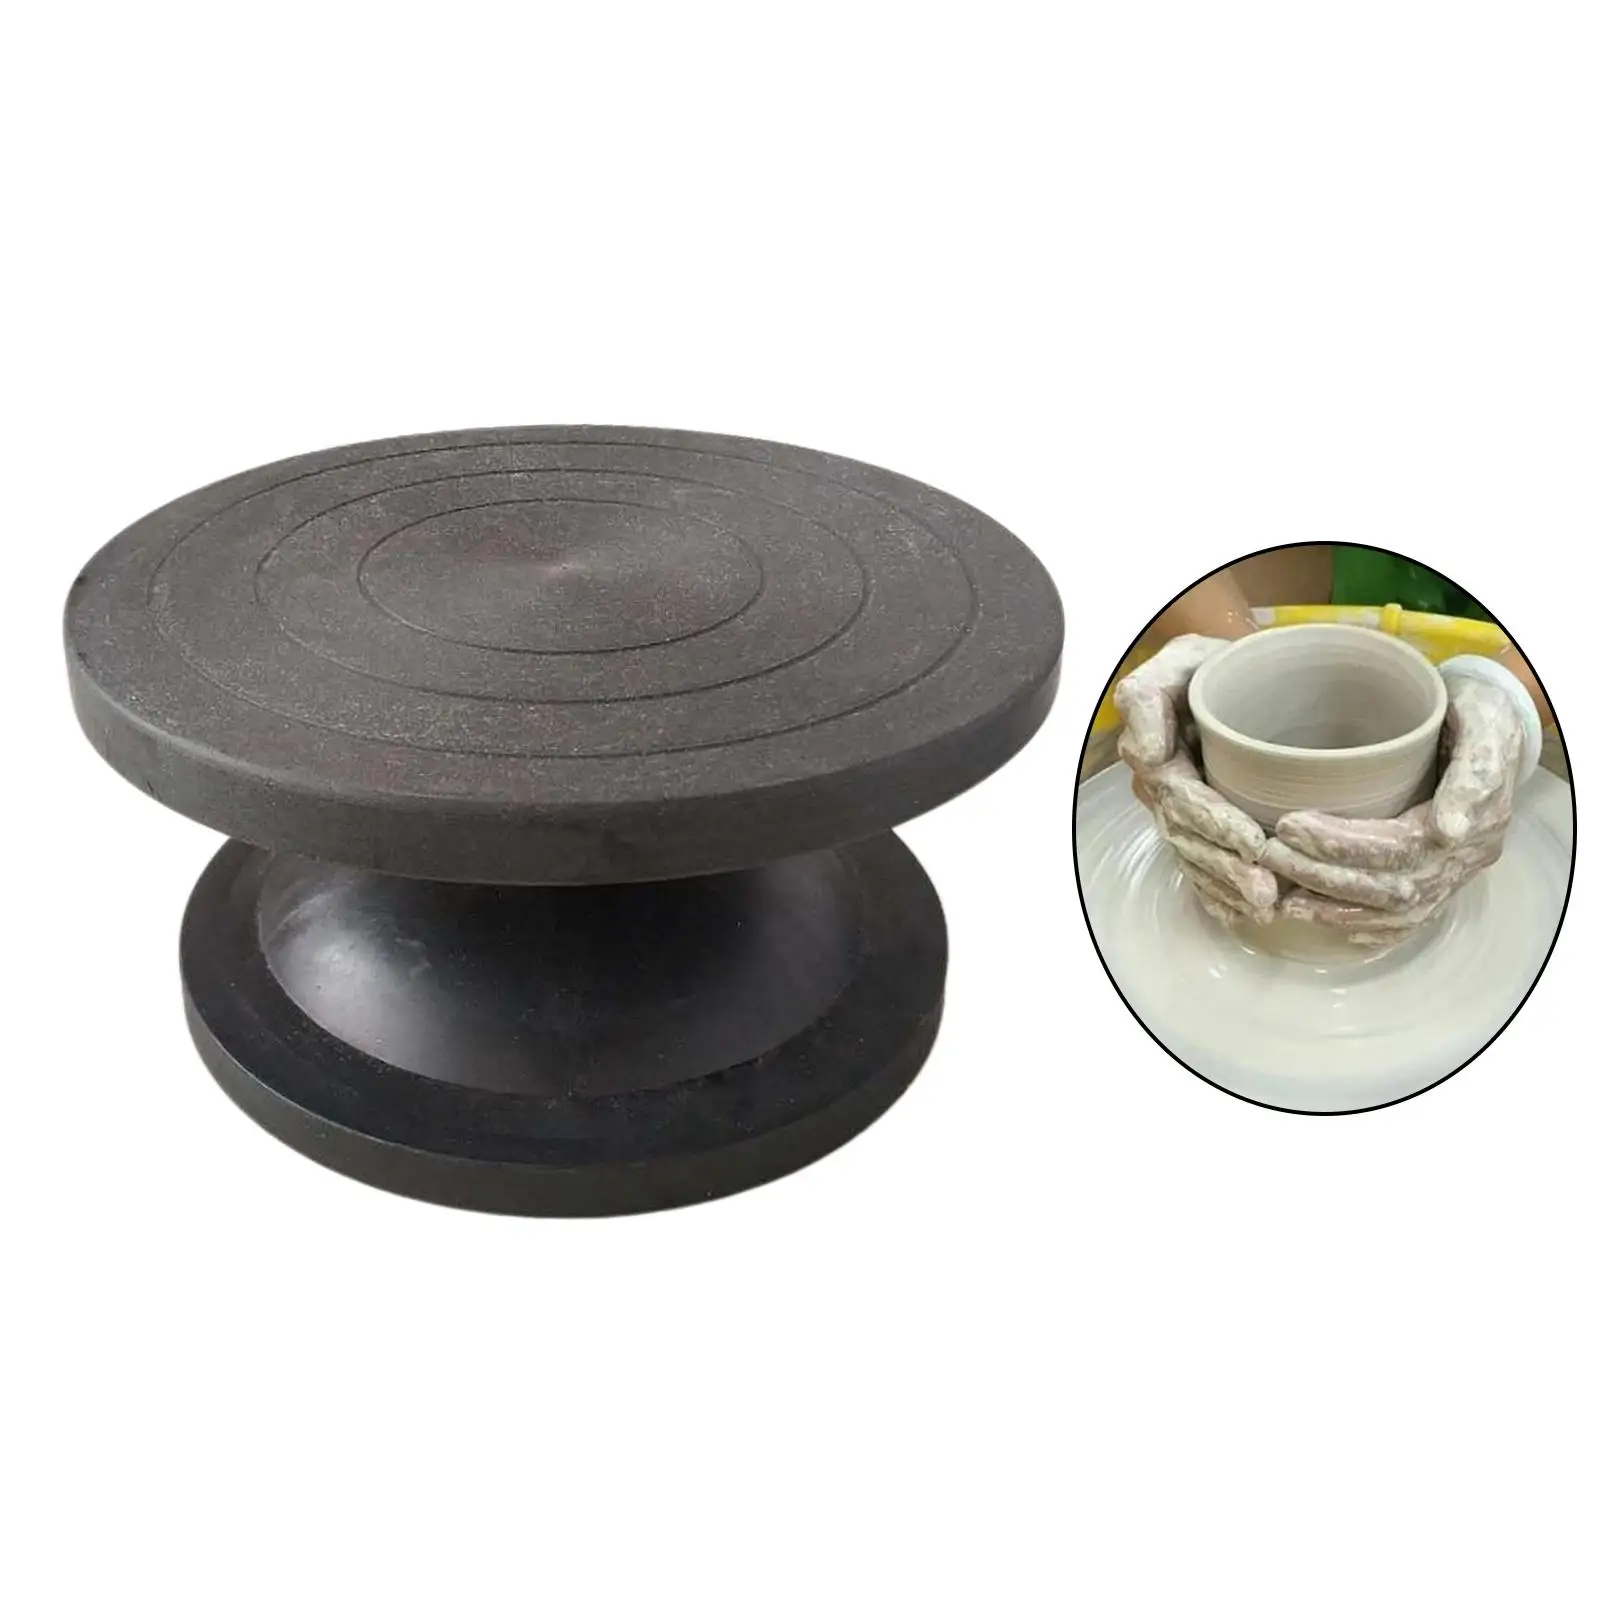  Wheel Plastic Turntable Ceramic Pottery Sculpture Tool Accessories Construction & Turntable Hand